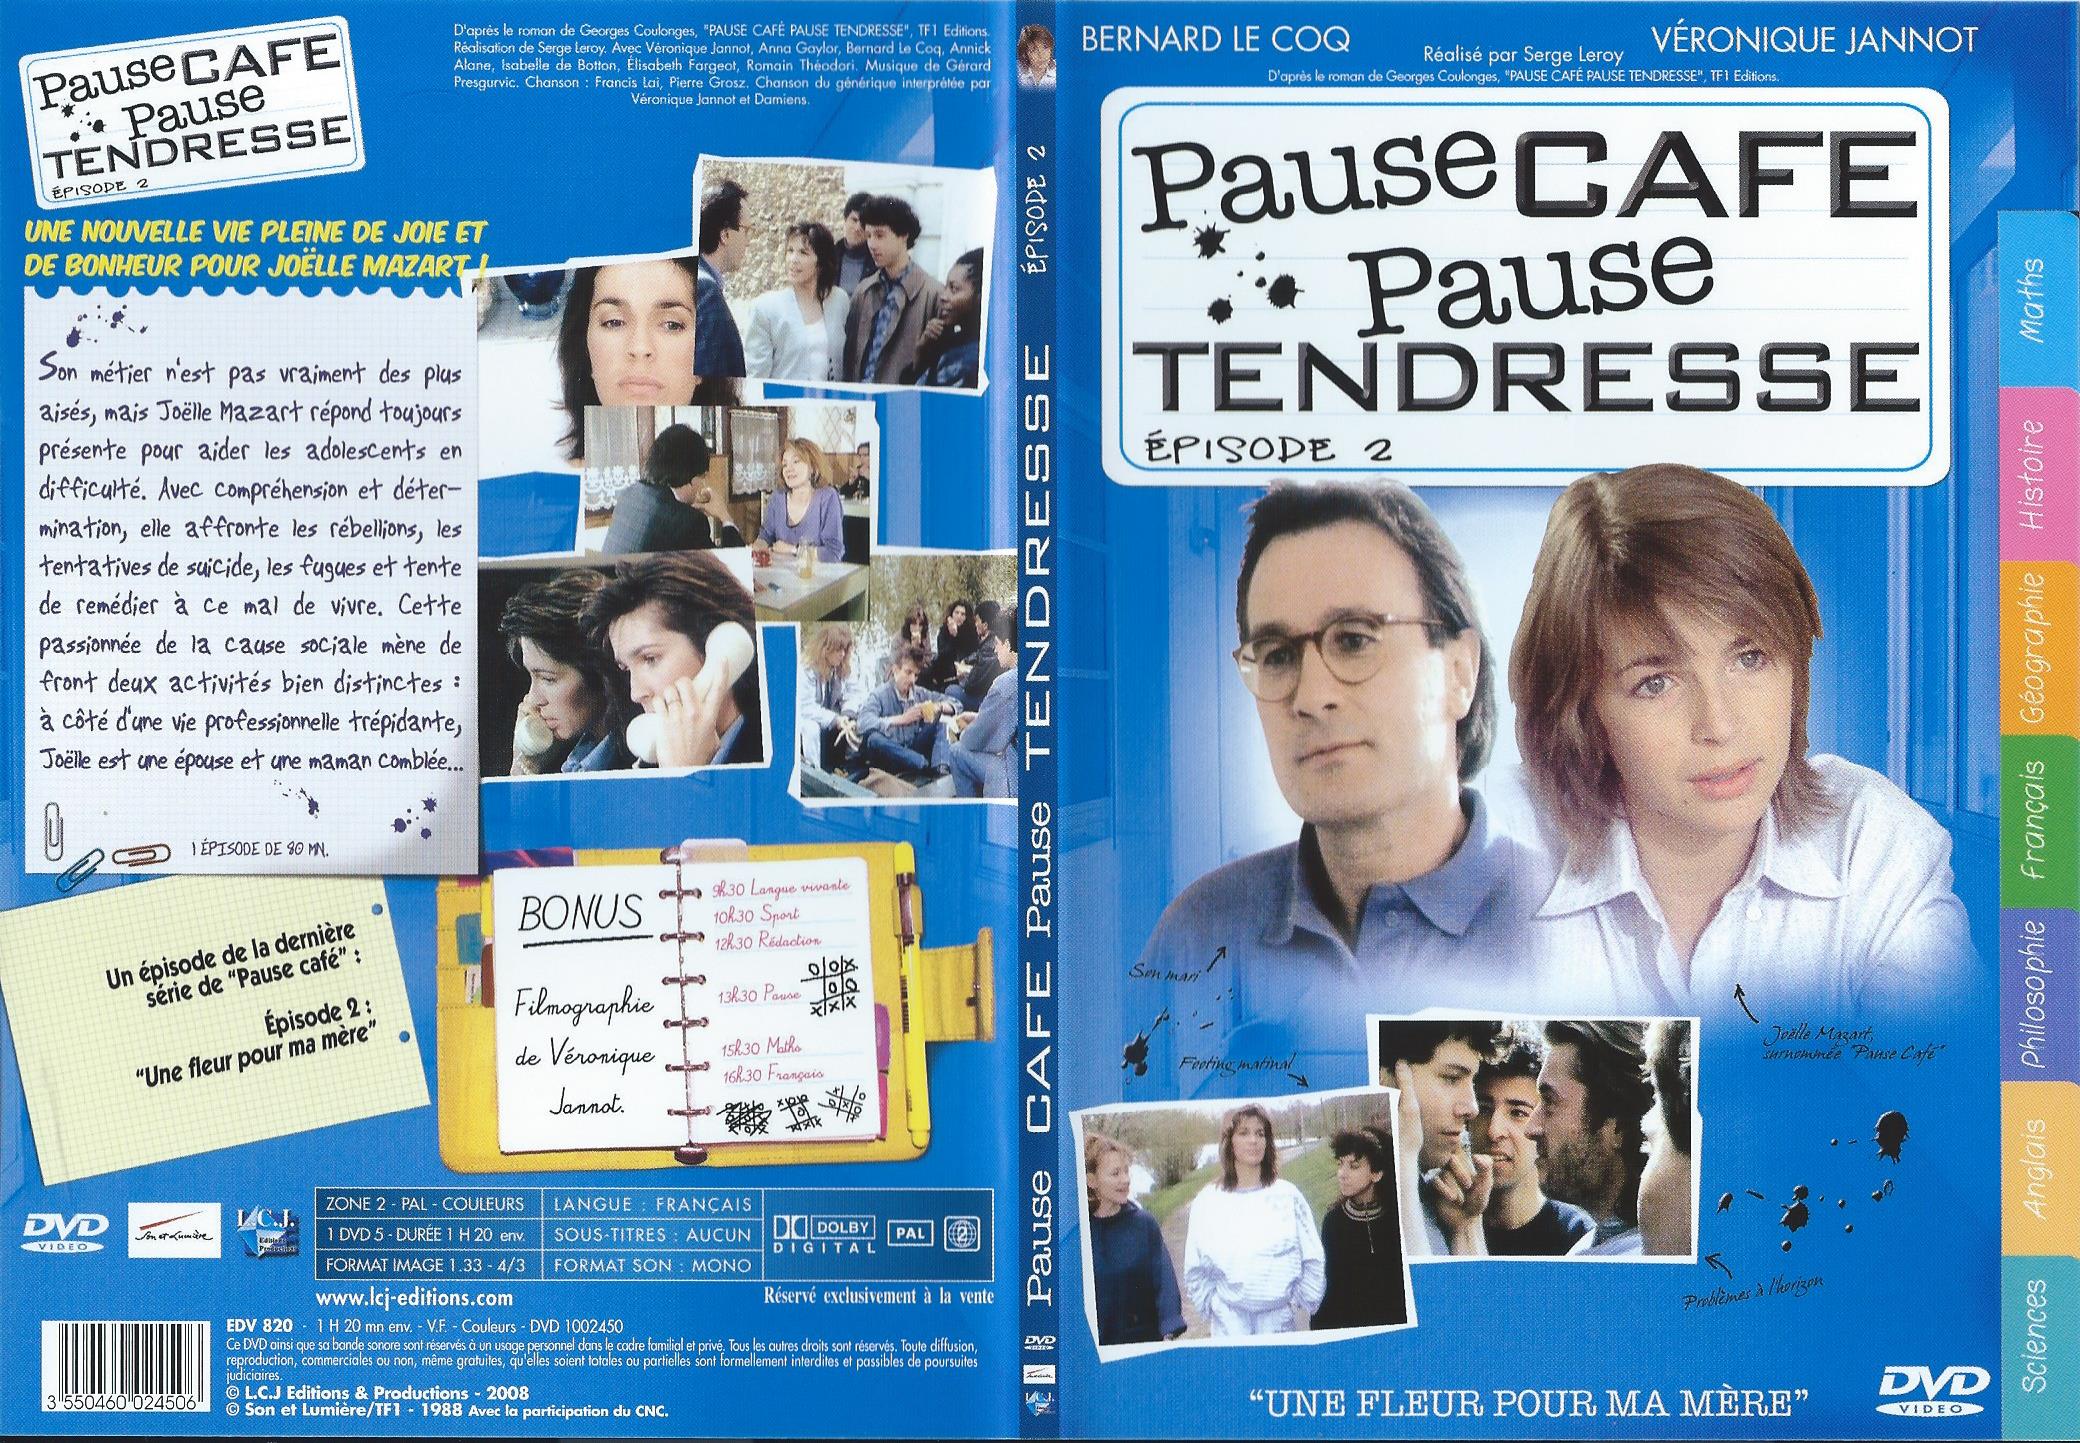 Jaquette DVD Pause Caf, Pause Tendresse DVD 2